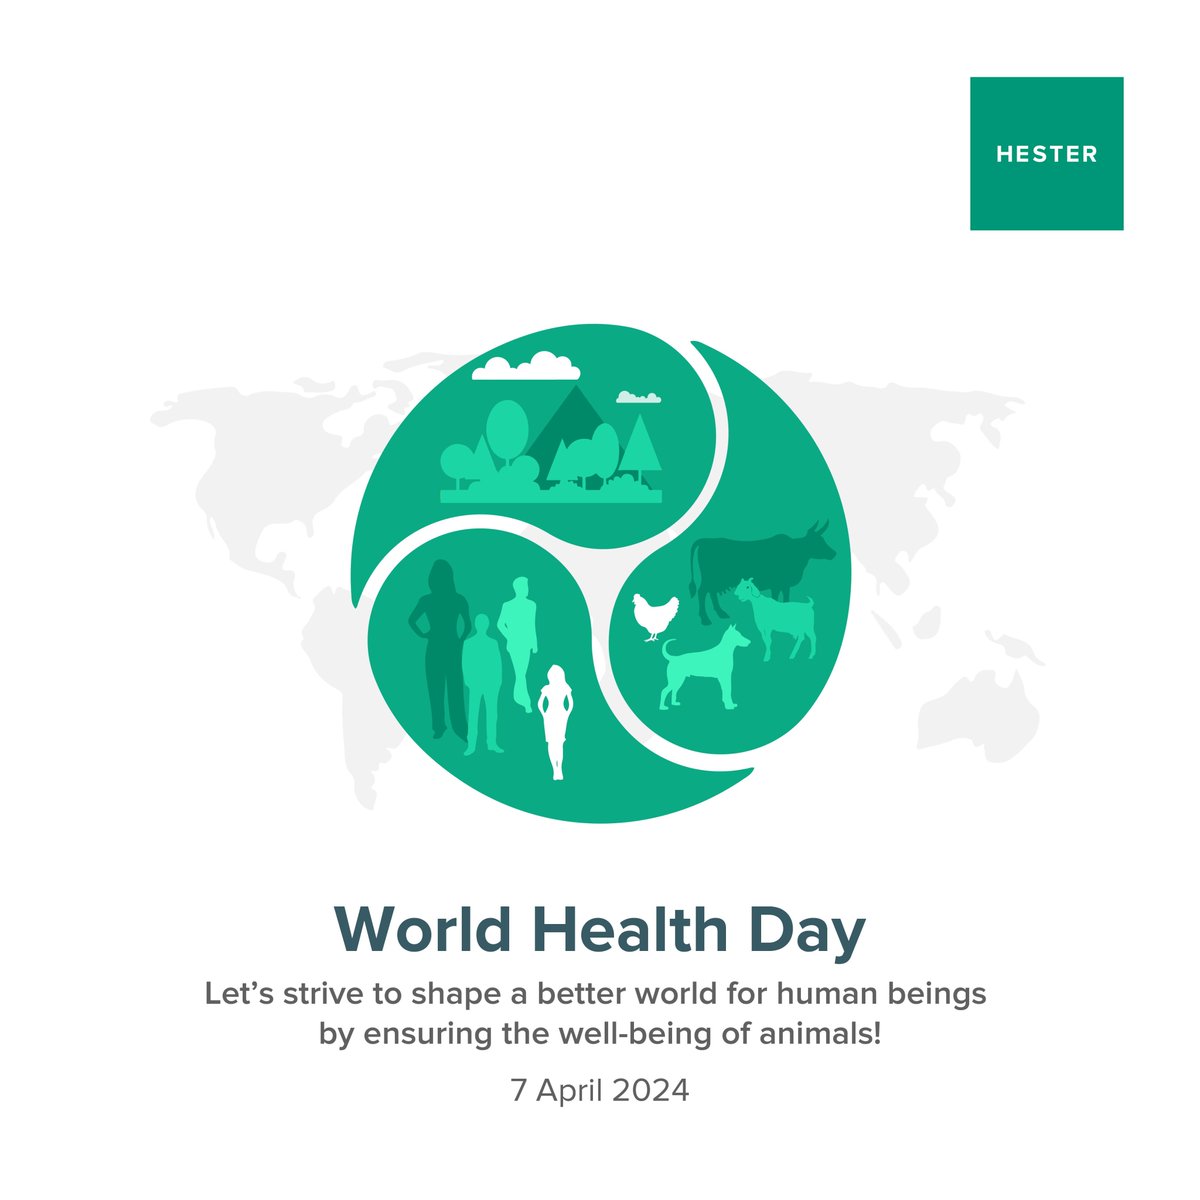 Every day, let's make it a priority to ensure the well-being of all living beings, for a healthier planet.

#Hester #worldhealthday2024 #wellbeingforall #healthyplanet #sustainableliving #everydaypriority #globalwellness #ecofriendlyliving #caringfornature #planethealth